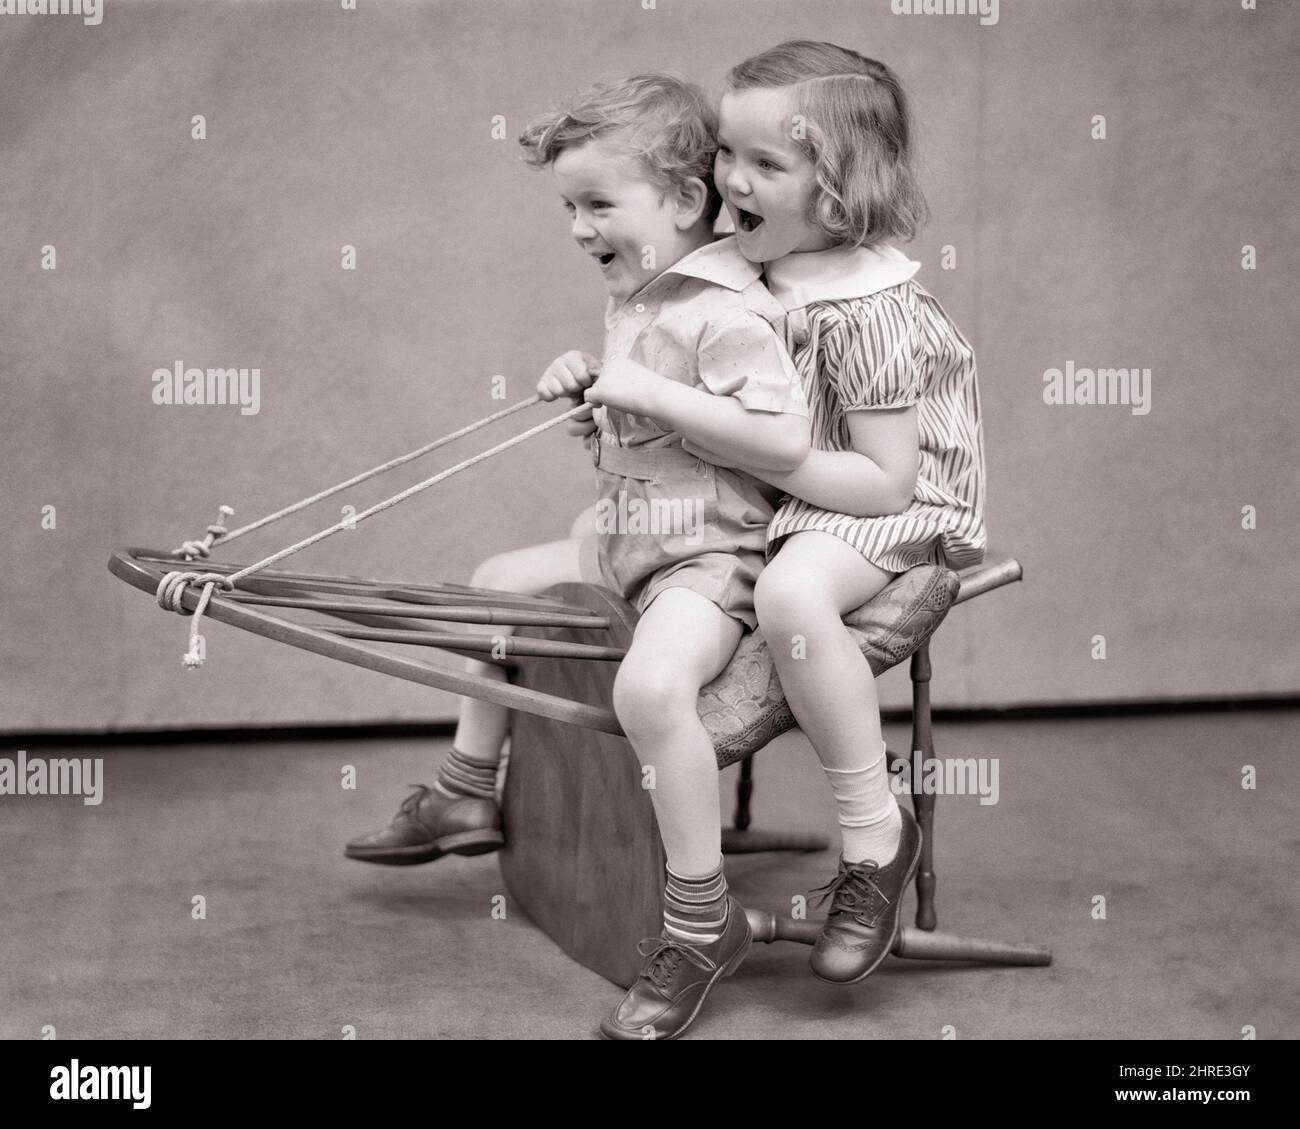 1930s LAUGHING SMILING BOY AND GIRL SITTING ON BACK OF WINDSOR CHAIR PRETENDING IT IS A HORSE OR CARRIAGE OR EVEN A WINTER SLED  - j3228 HAR001 HARS FEMALES BROTHERS STUDIO SHOT SLED HEALTHINESS HOME LIFE COPY SPACE FRIENDSHIP FULL-LENGTH PERSONS MALES SIBLINGS SISTERS B&W CARRIAGE REINS HAPPINESS CHEERFUL AND SIBLING PRETENDING FRIENDLY IMAGINARY IMAGINATION JOYFUL IMAGINED OR WINDSOR CREATIVITY BLACK AND WHITE CAUCASIAN ETHNICITY EVEN HAR001 MAKE BELIEVE OLD FASHIONED Stock Photo